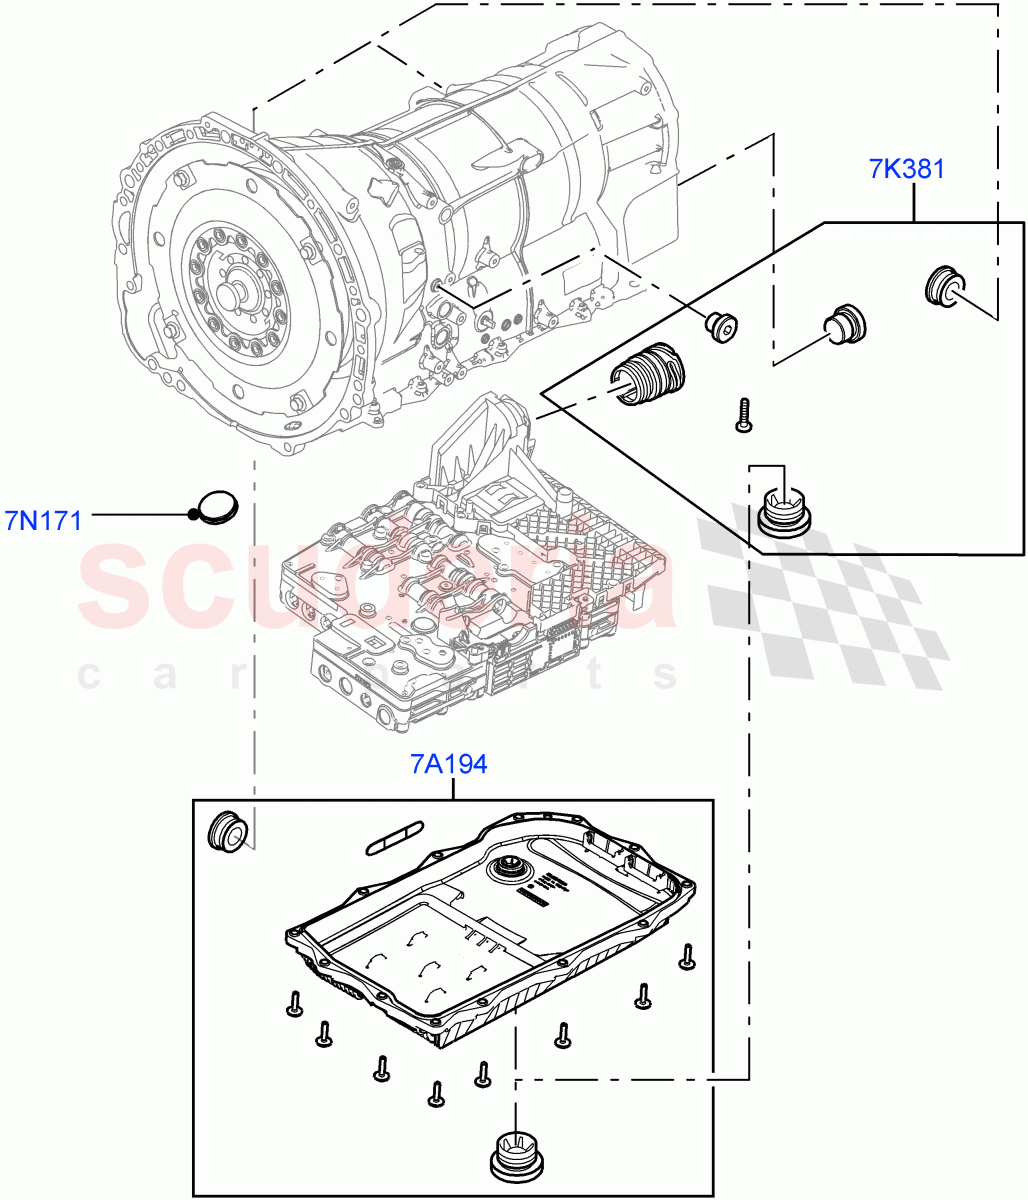 Transmission External Components(5.0L P AJ133 DOHC CDA S/C Enhanced,8 Speed Auto Trans ZF 8HP70 4WD)((V)FROMKA000001) of Land Rover Land Rover Range Rover Velar (2017+) [2.0 Turbo Diesel AJ21D4]